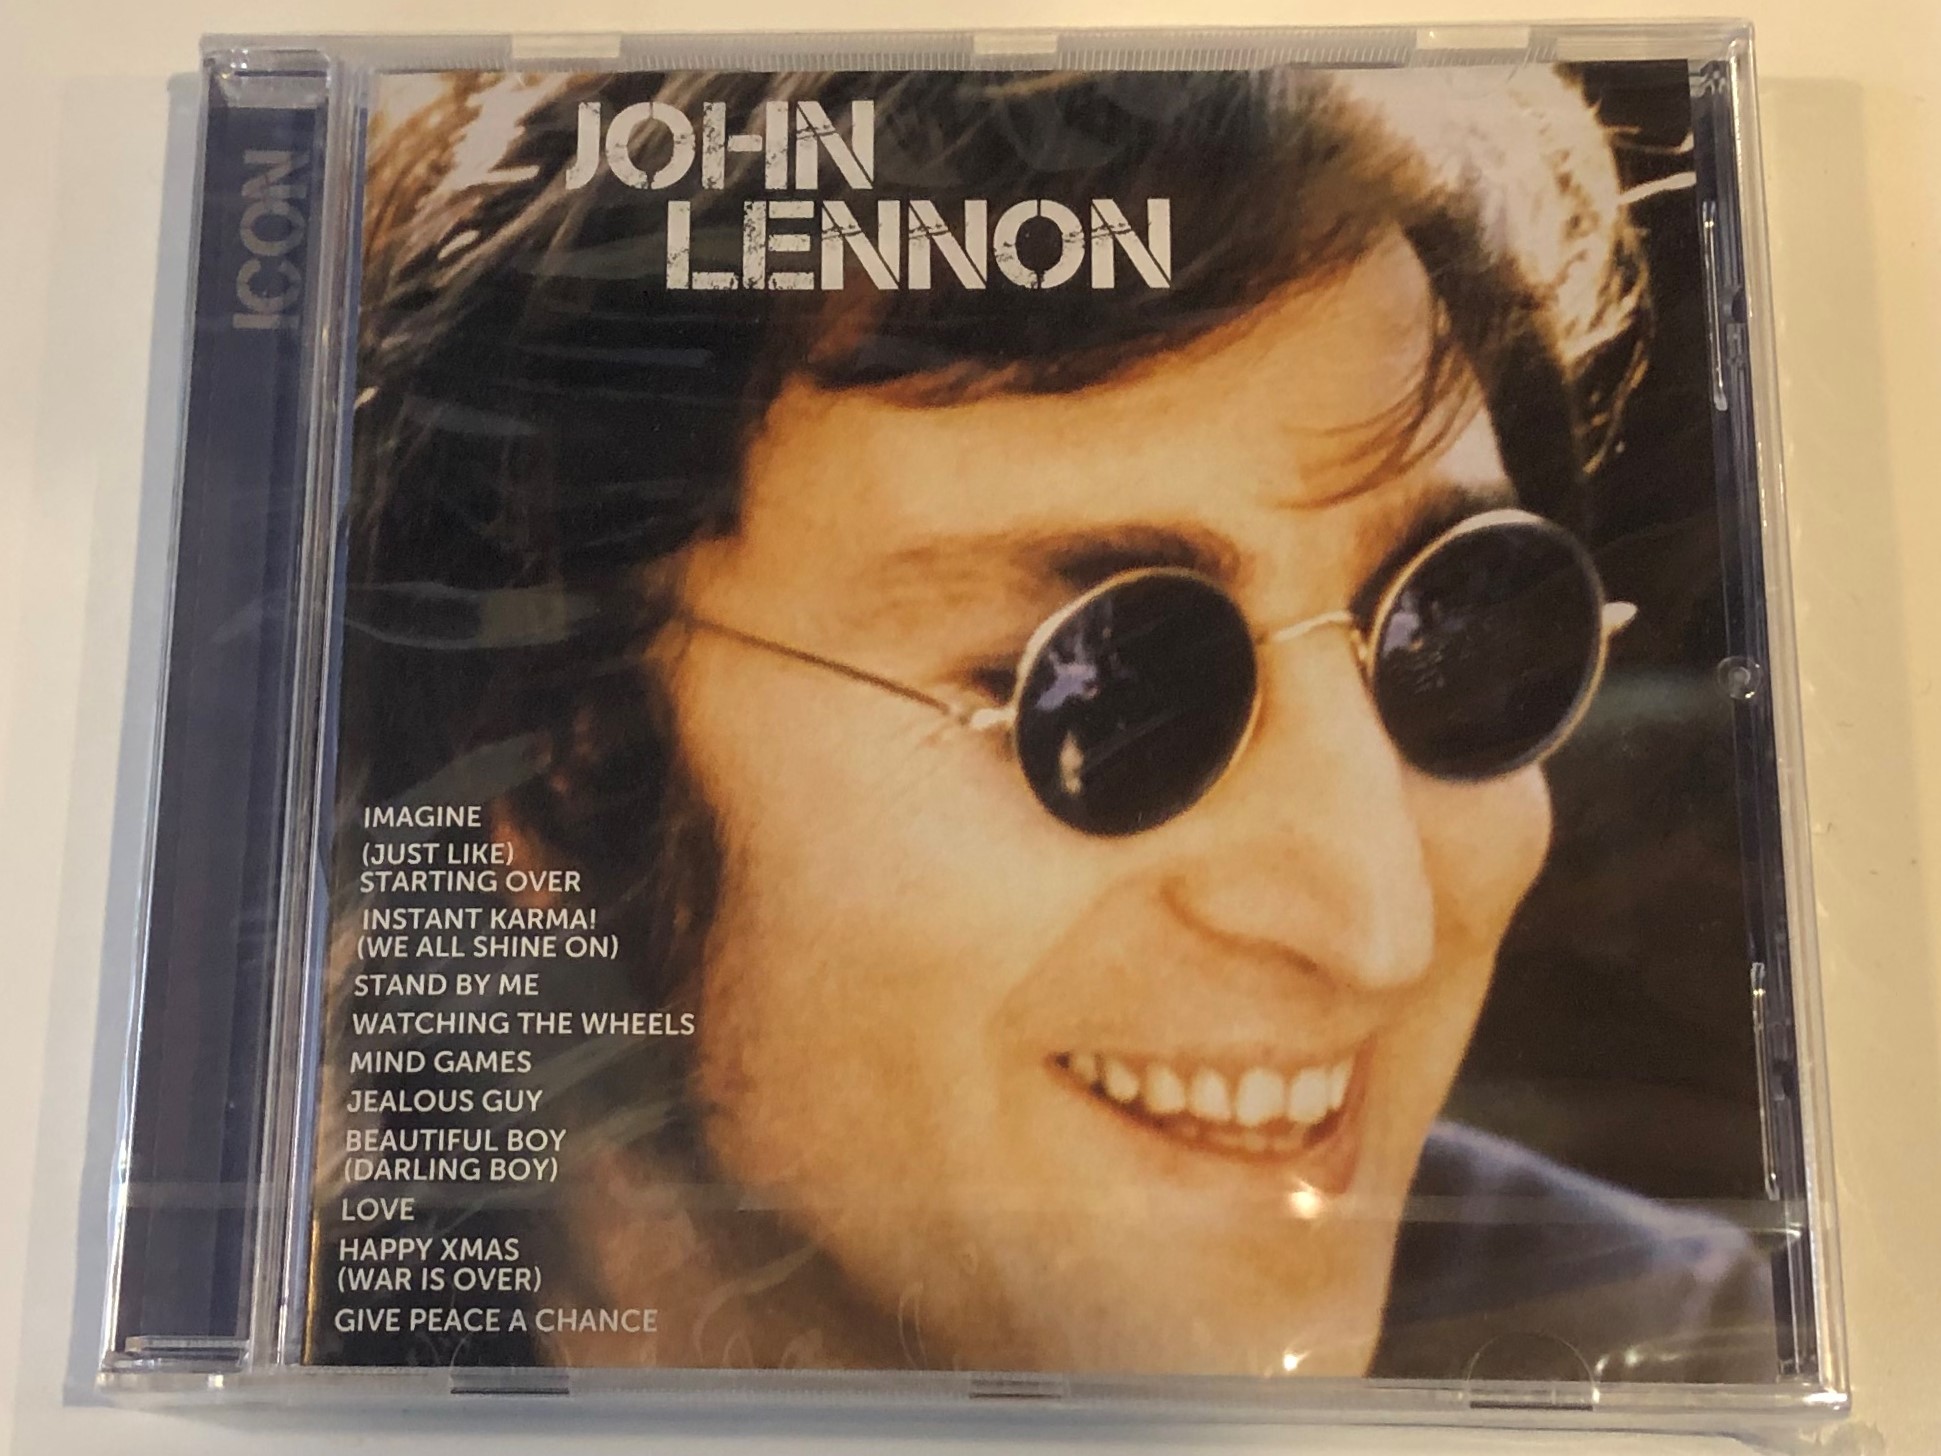 john-lennon-icon-imagine-just-like-starting-over-instant-karma-we-all-shine-on-stand-by-me-watching-the-wheels-mind-games-jealous-guy-beautiful-boy-darling-boy-love-...-capitol-1-.jpg